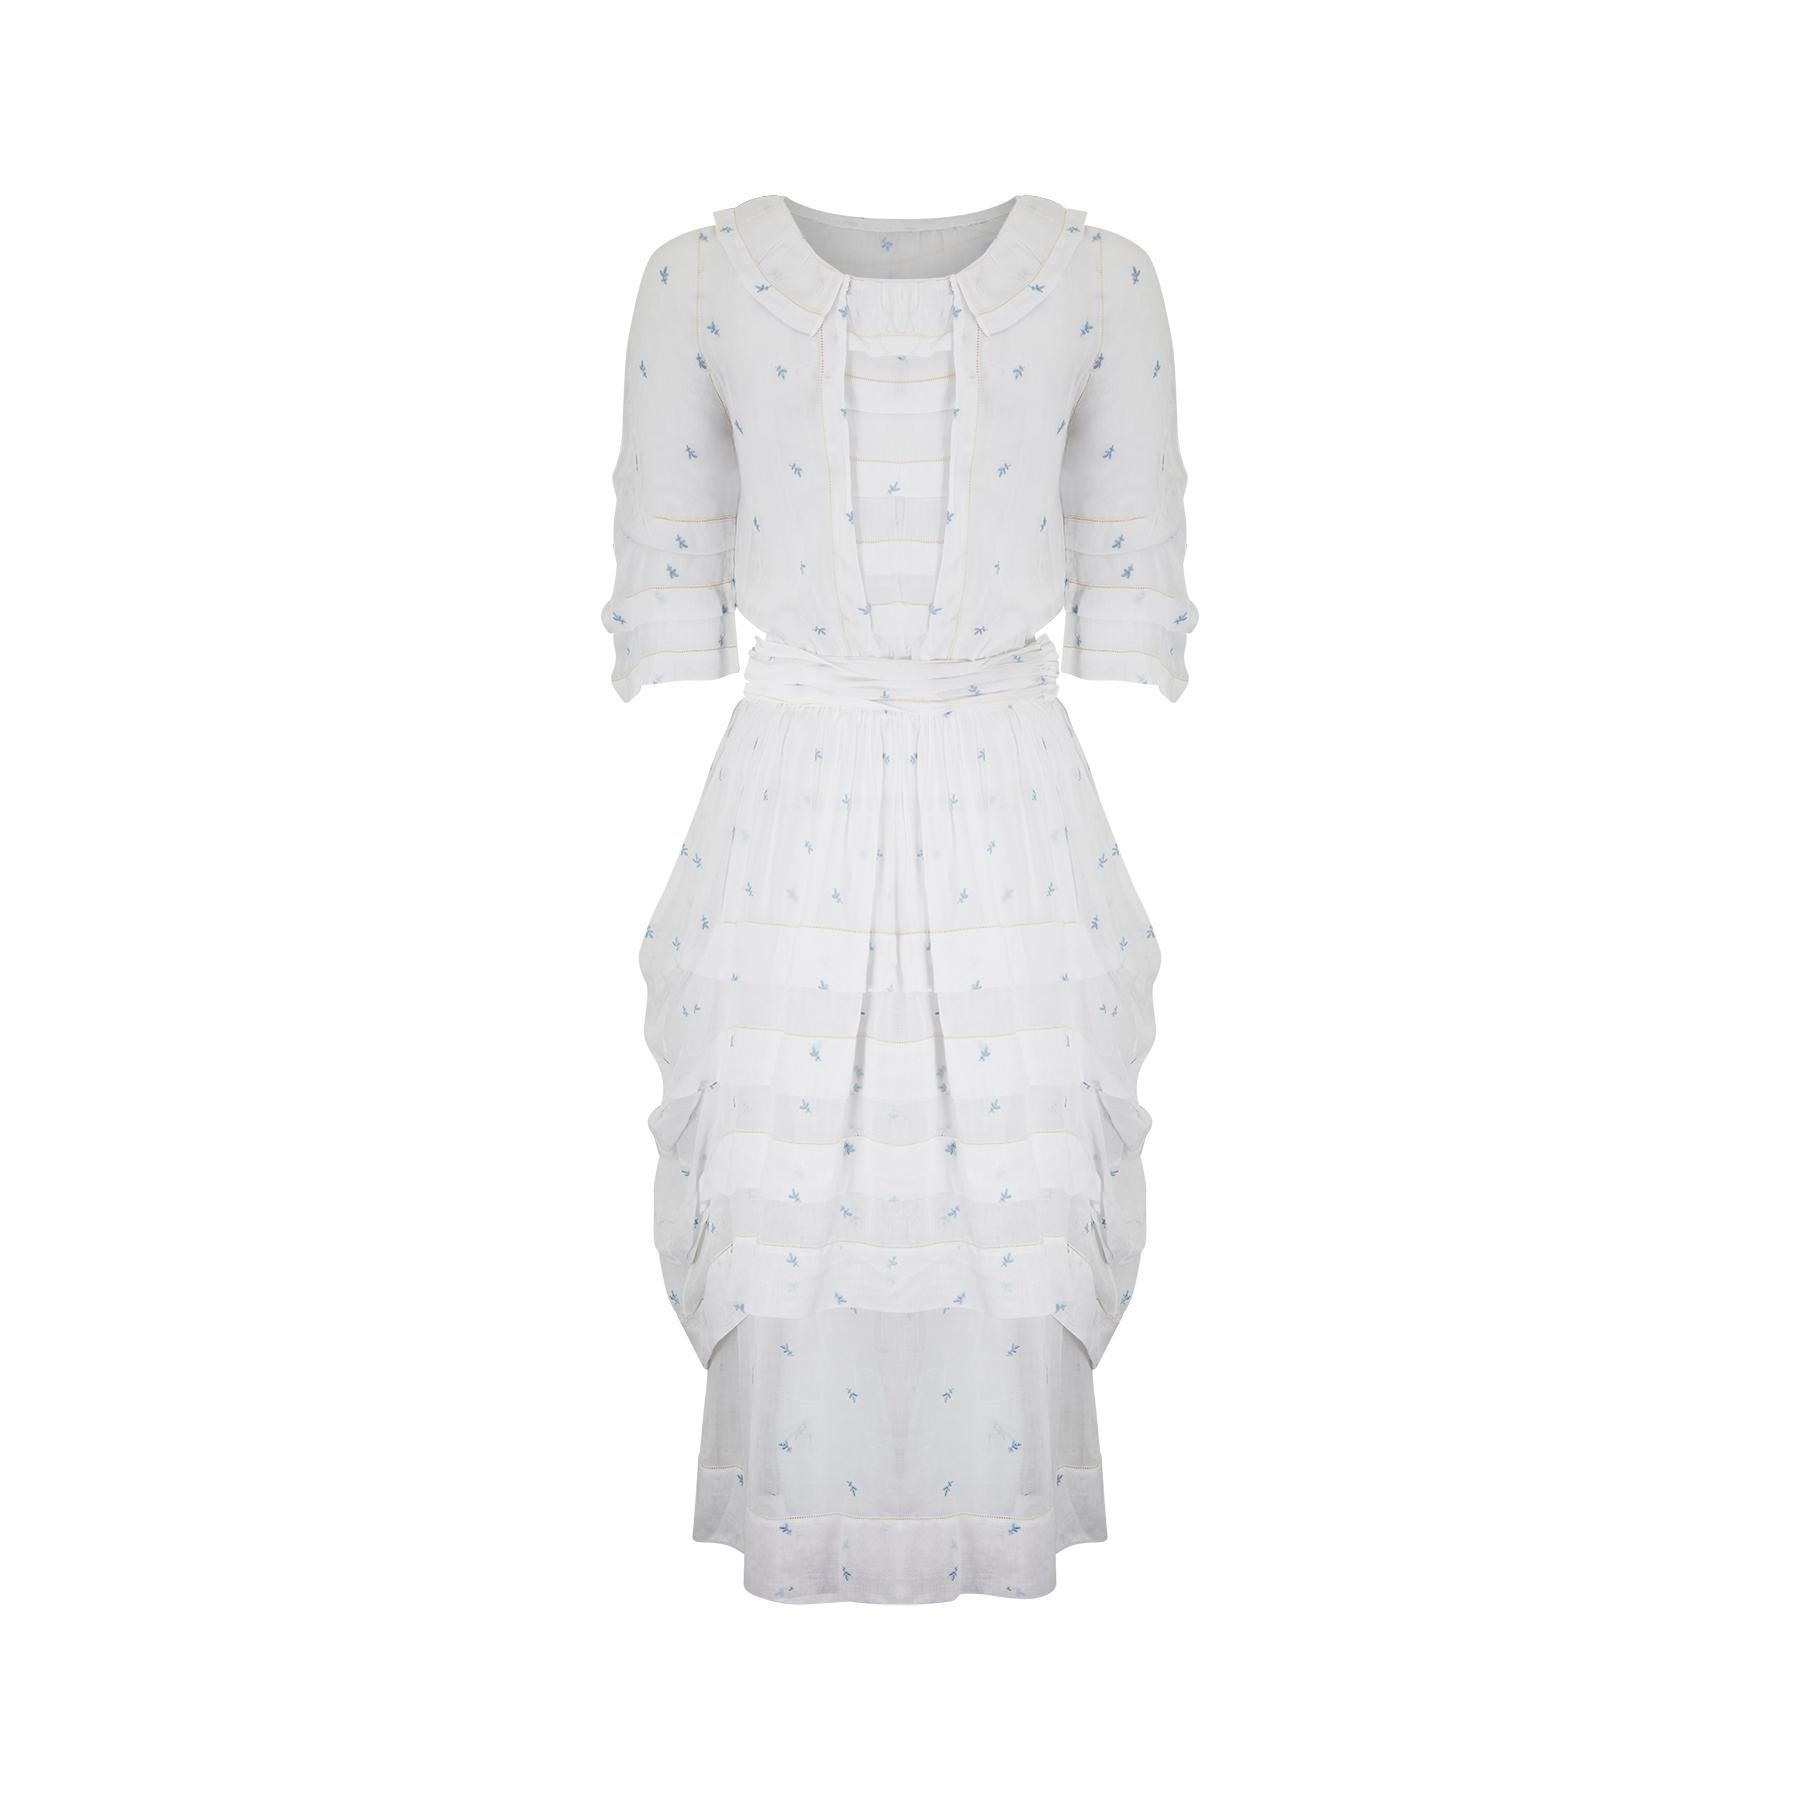 This is a superb example of an American made tea or lawn dress from the 1900s Edwardian era or possibly a tiny bit later.  The dress is made from a lightweight white muslin cotton and has been hand-embroidered all over with what looks like a little